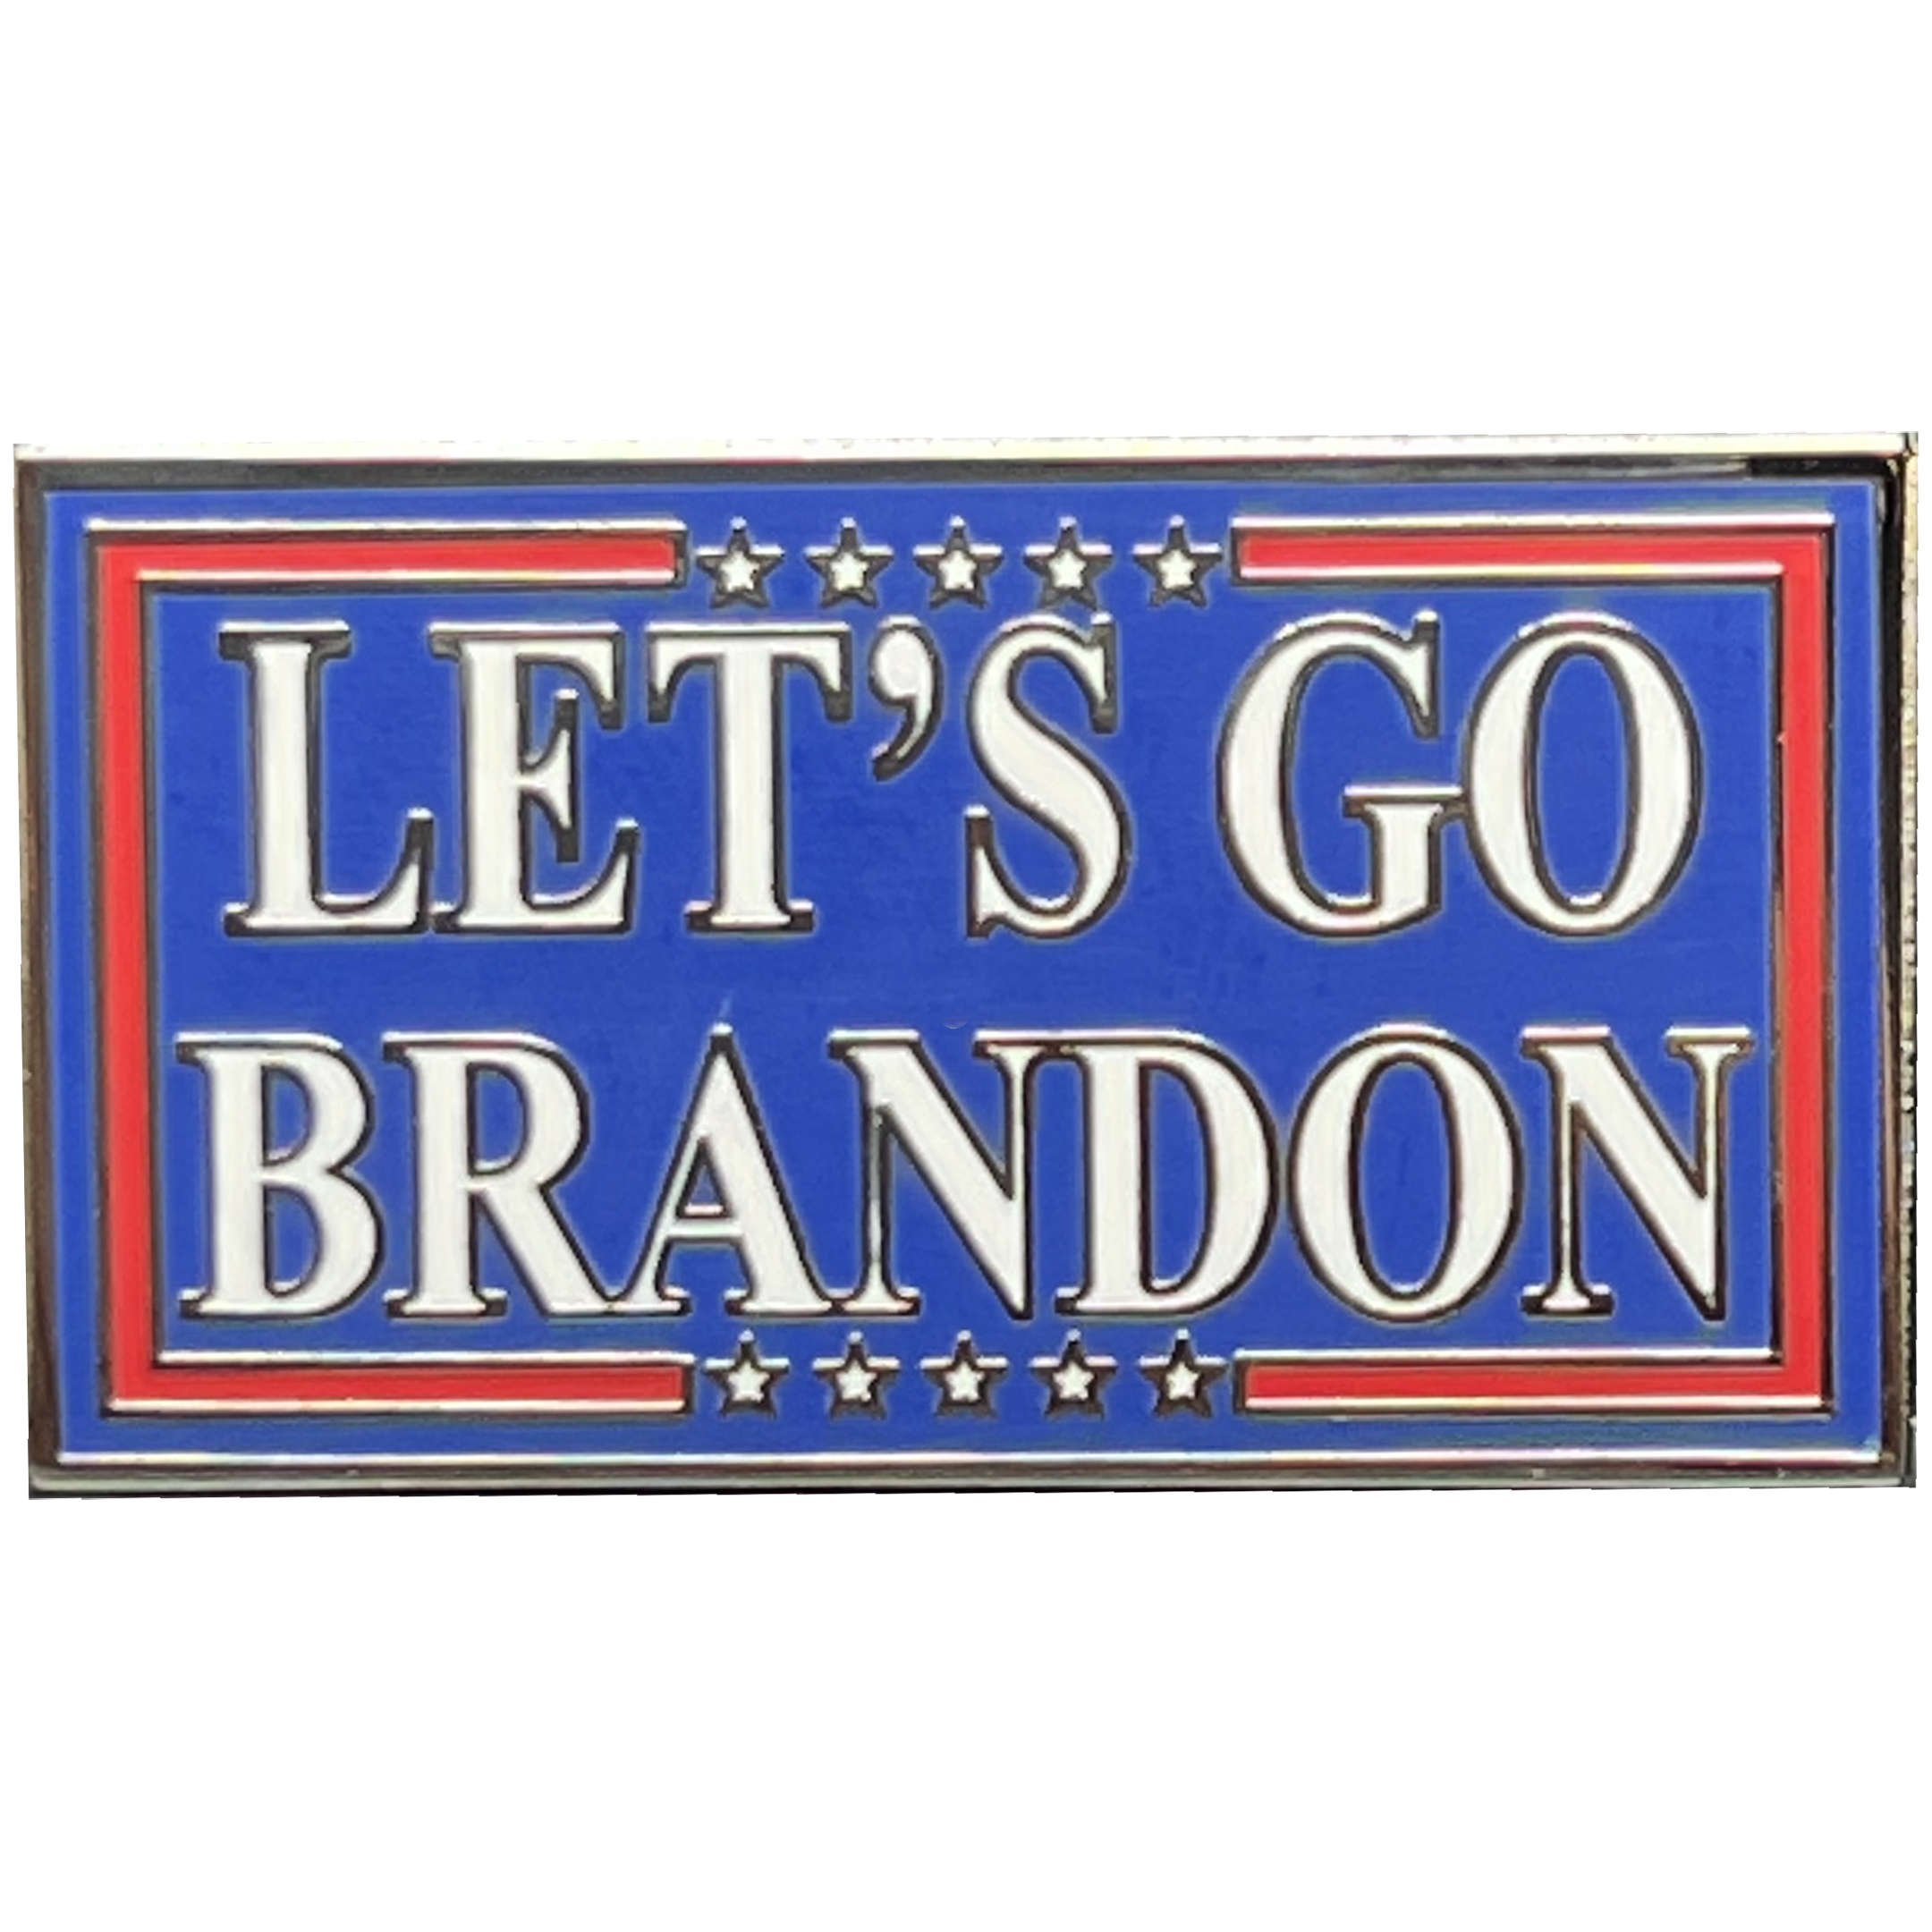 GL1-008 Let's Go Brandon LGB Pin with dual pin posts